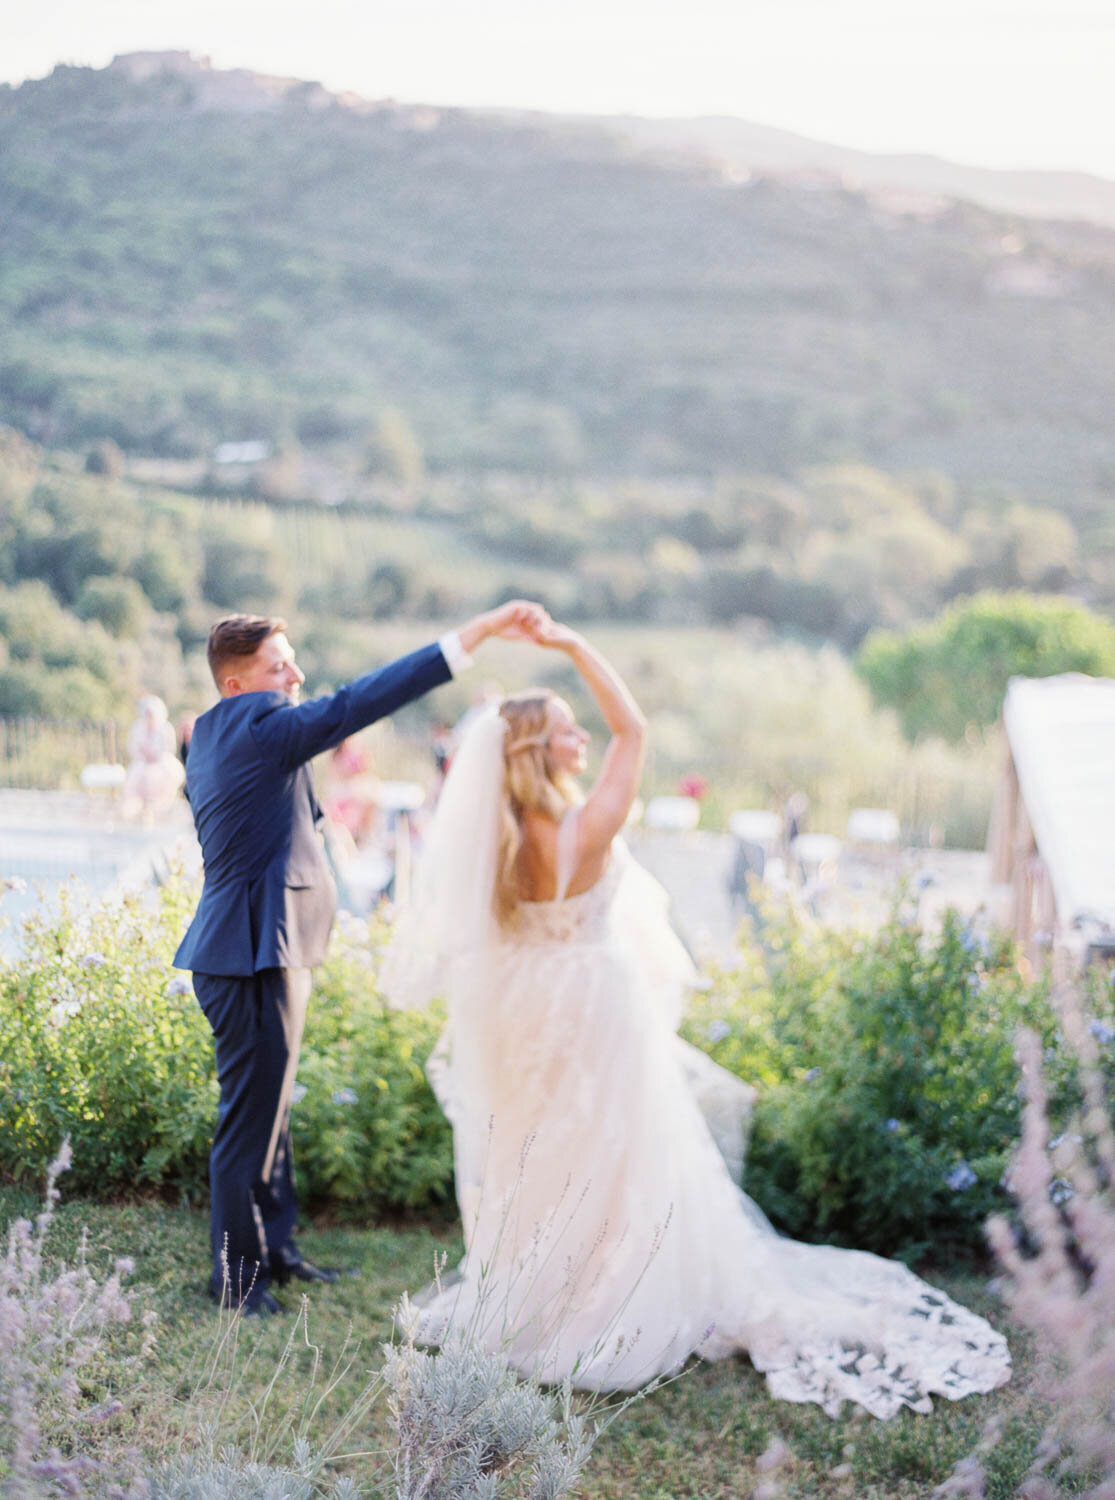 Bride and groom dancing in. tuscany